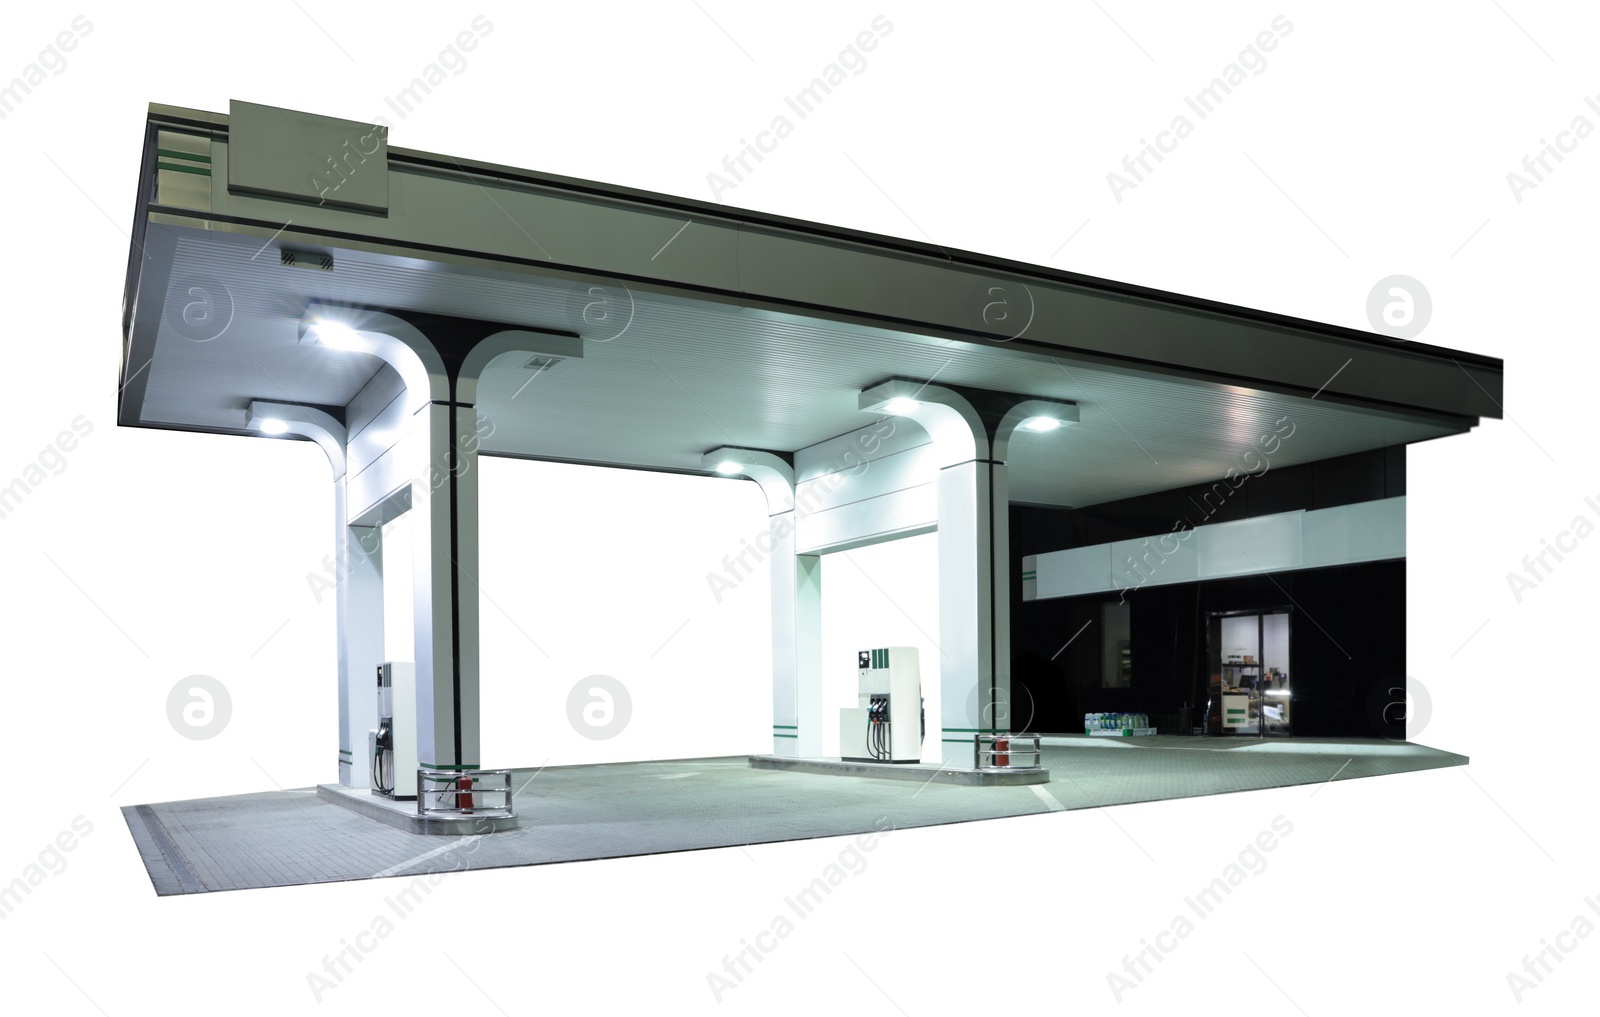 Image of Modern gas station on white background, exterior